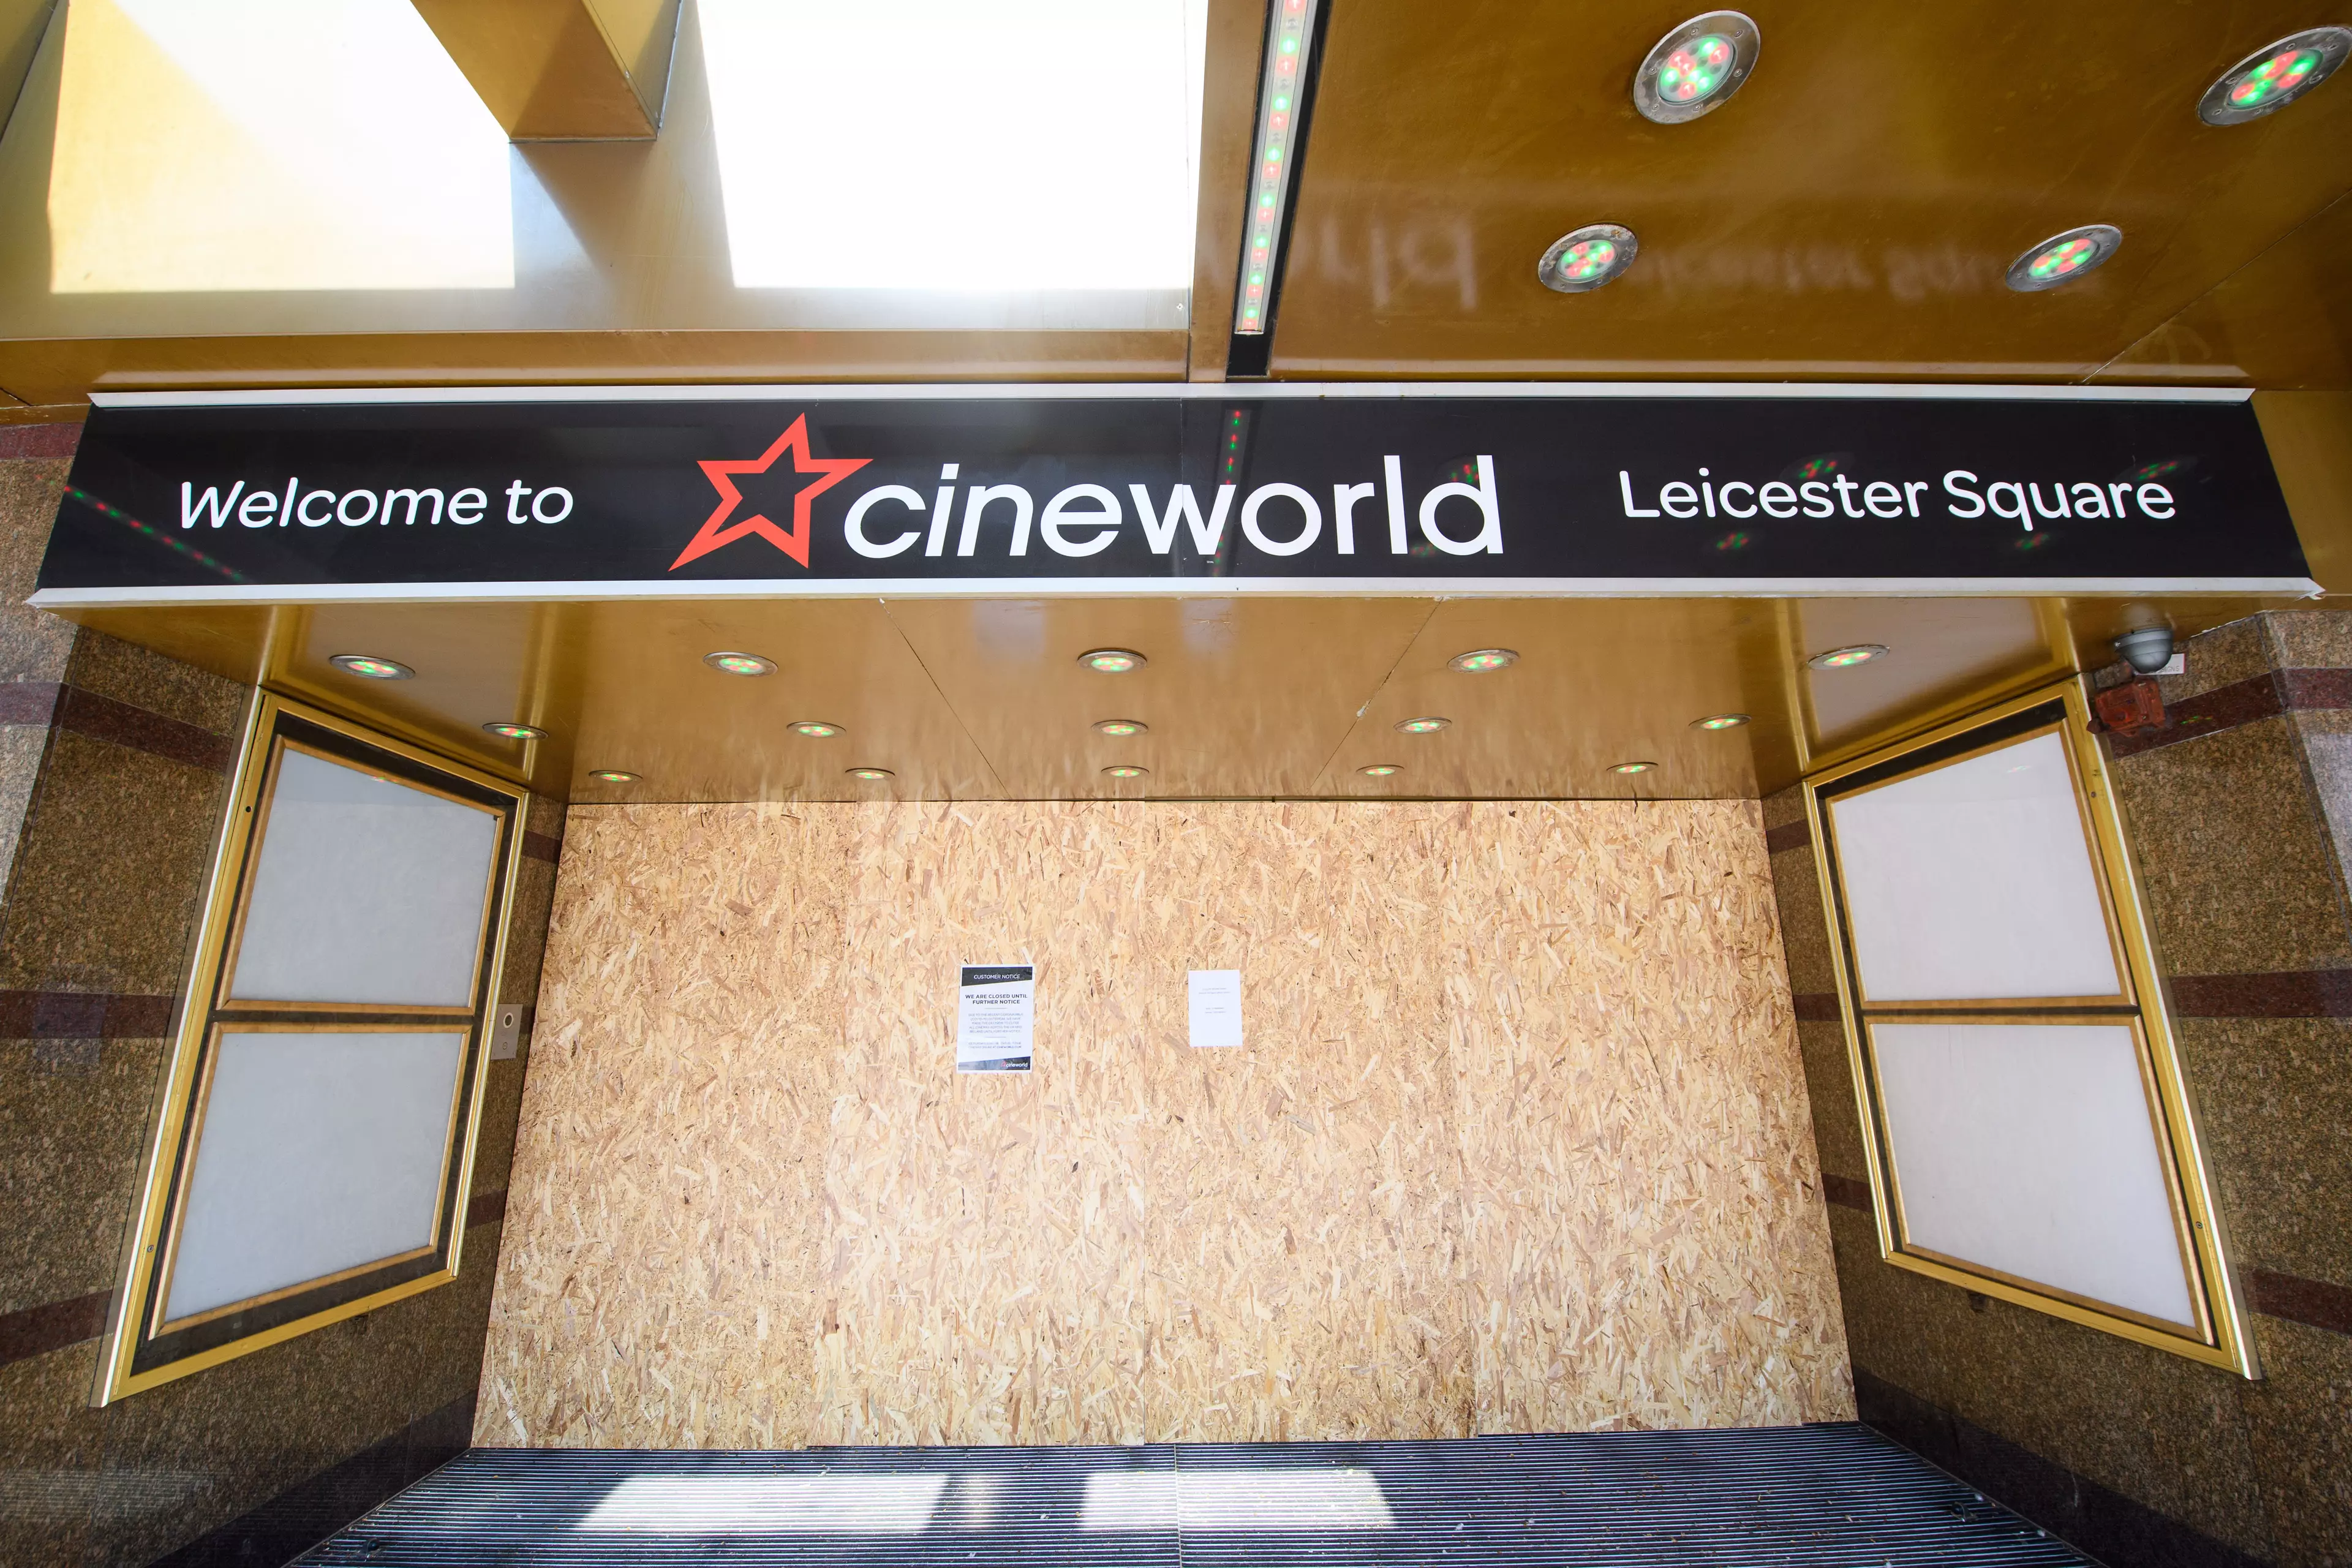 Cineworld closed its branches on 18 March.